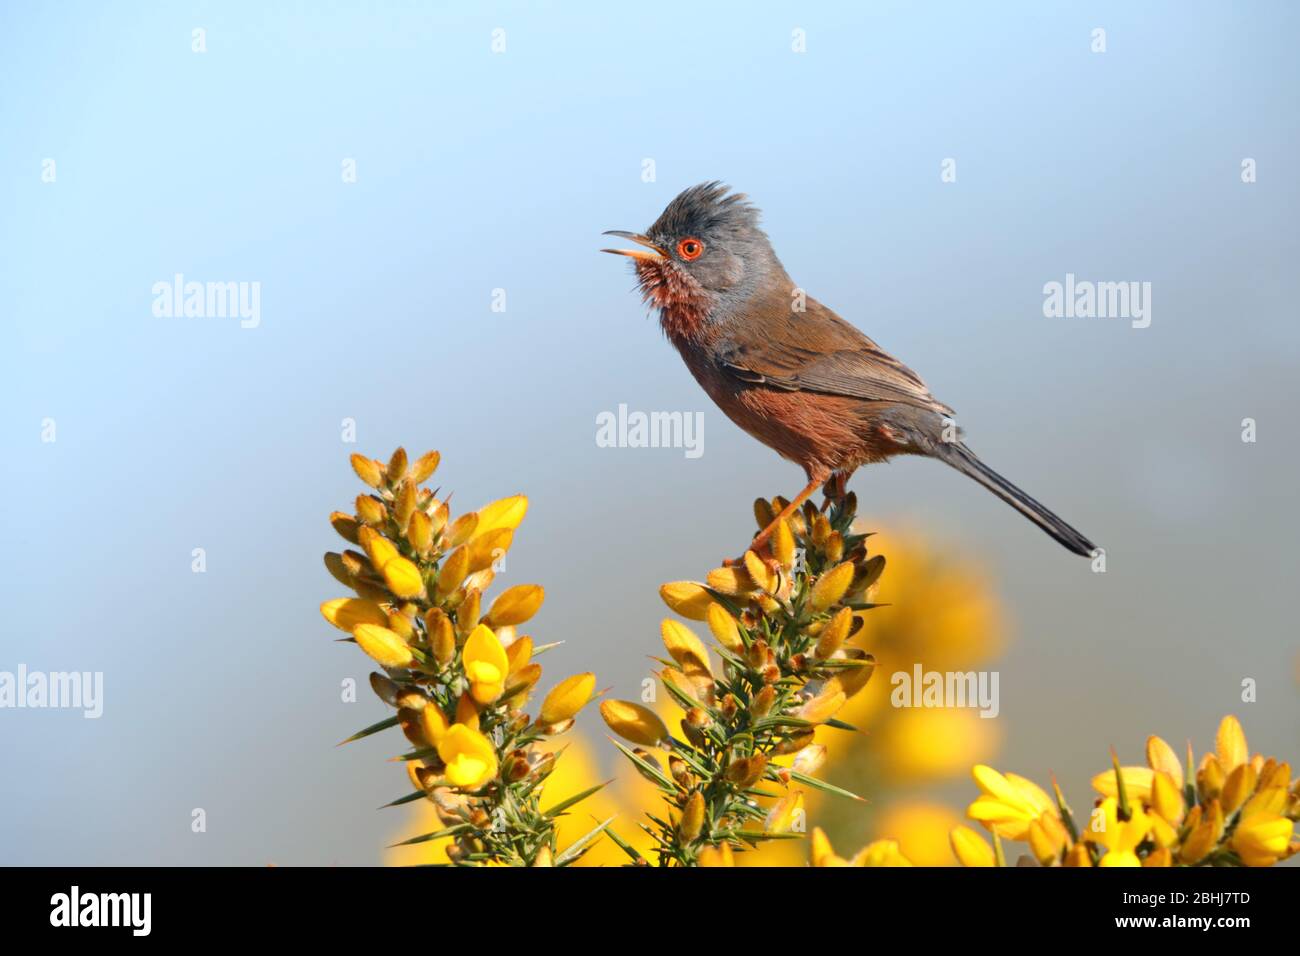 An adult male Dartford Warbler (Sylvia undata) in song on a gorse bush in England in Spring Stock Photo